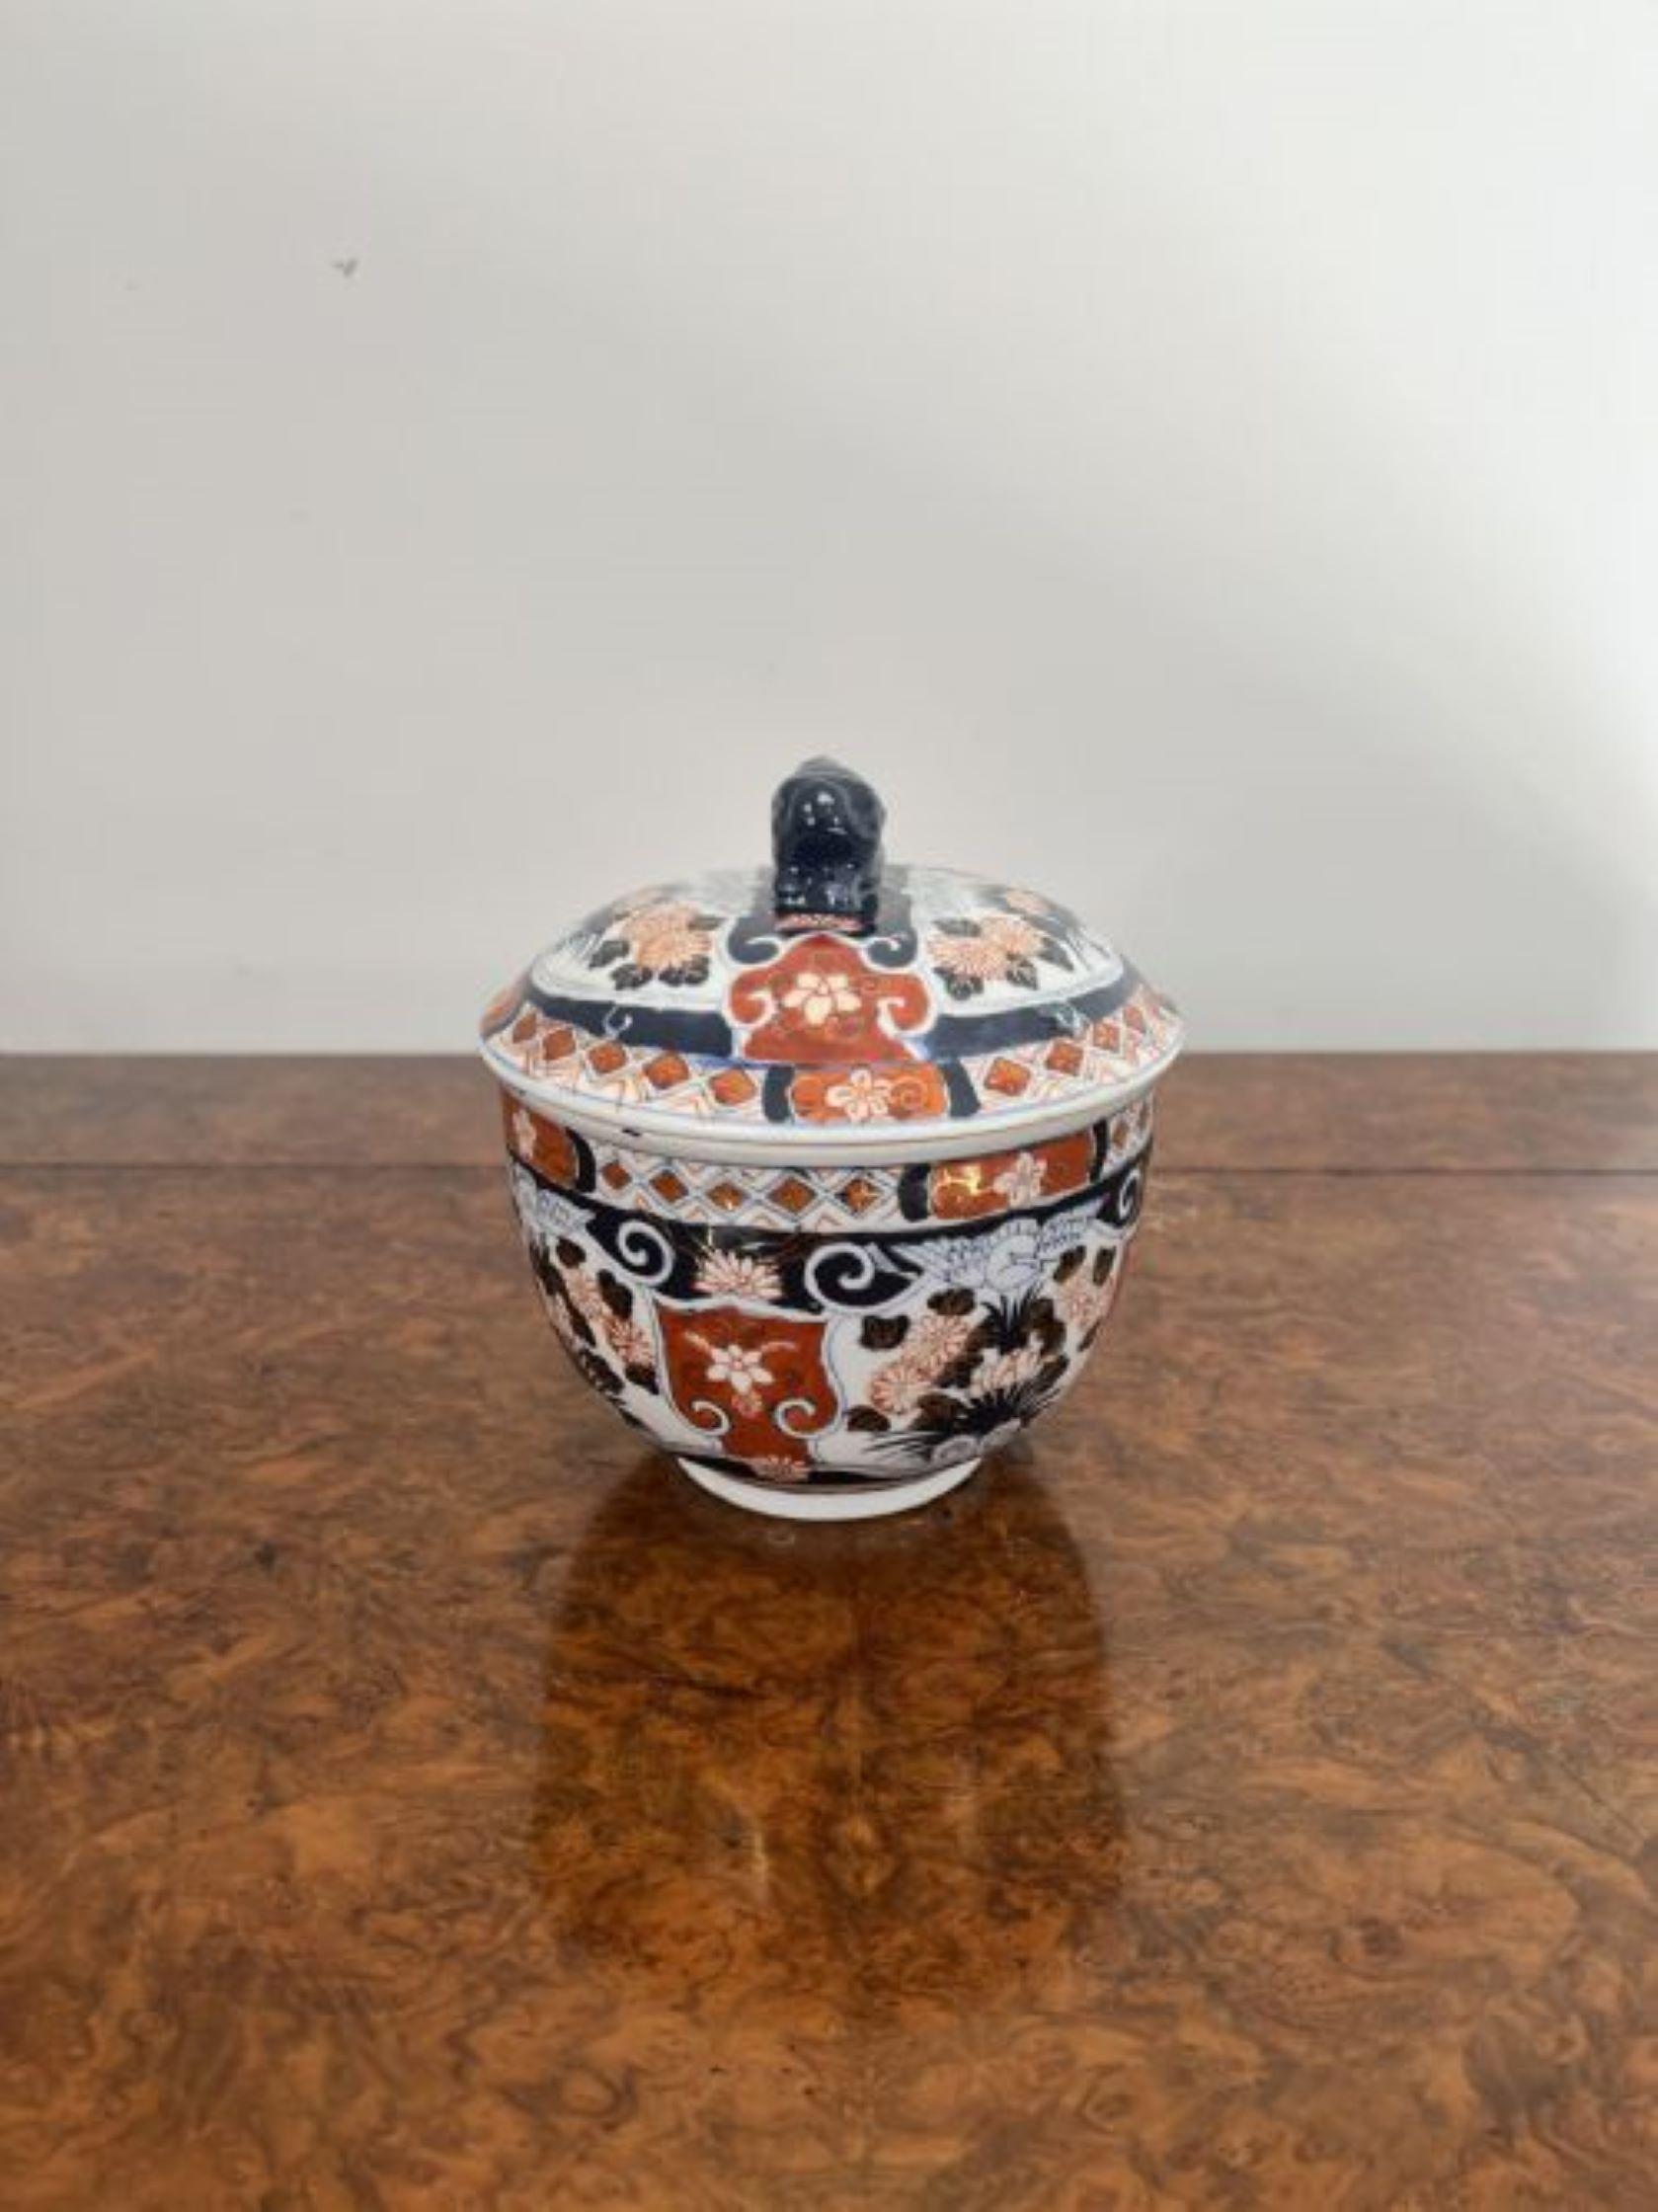 Quality antique Japanese imari lidded jar having a quality antique Japanese imari lidded jar with wonderful hand painted decoration in blue, red, white and gold colours decorated with flowers, trees and scrolls, having a removable lid with a dog of